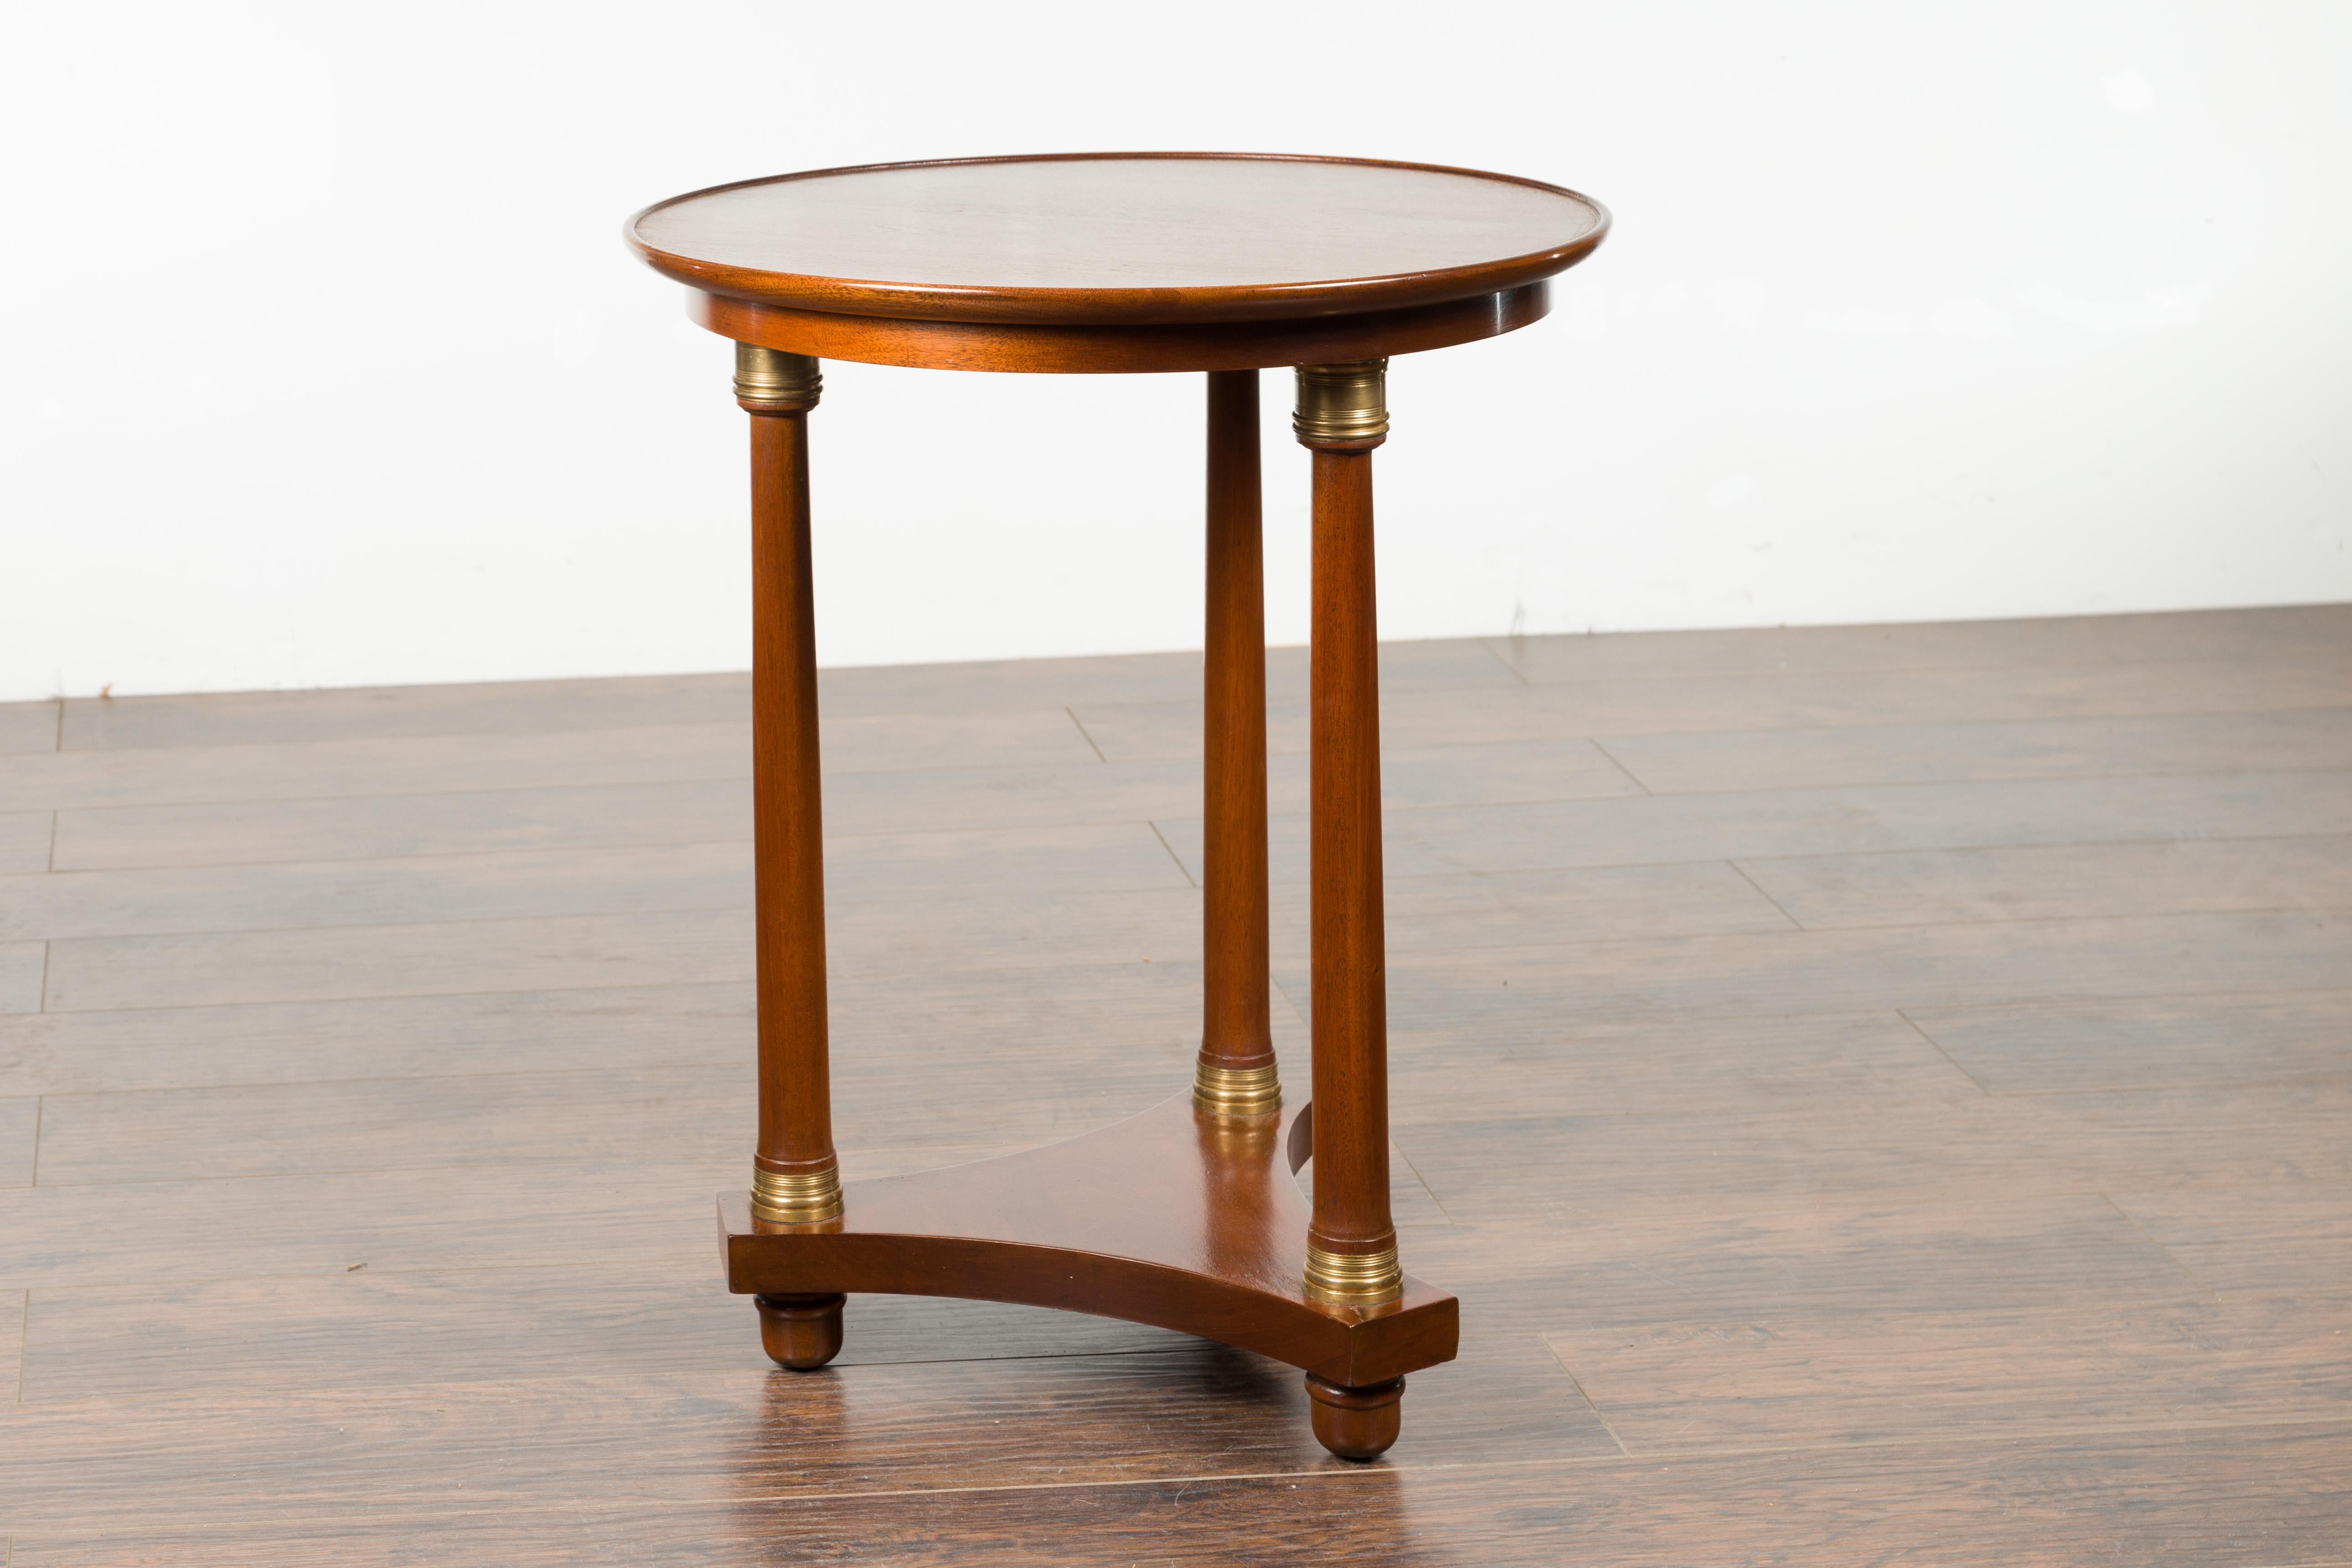 French 19th Century Empire Round Top Side Table with Bronze Mounts and Low Shelf For Sale 6